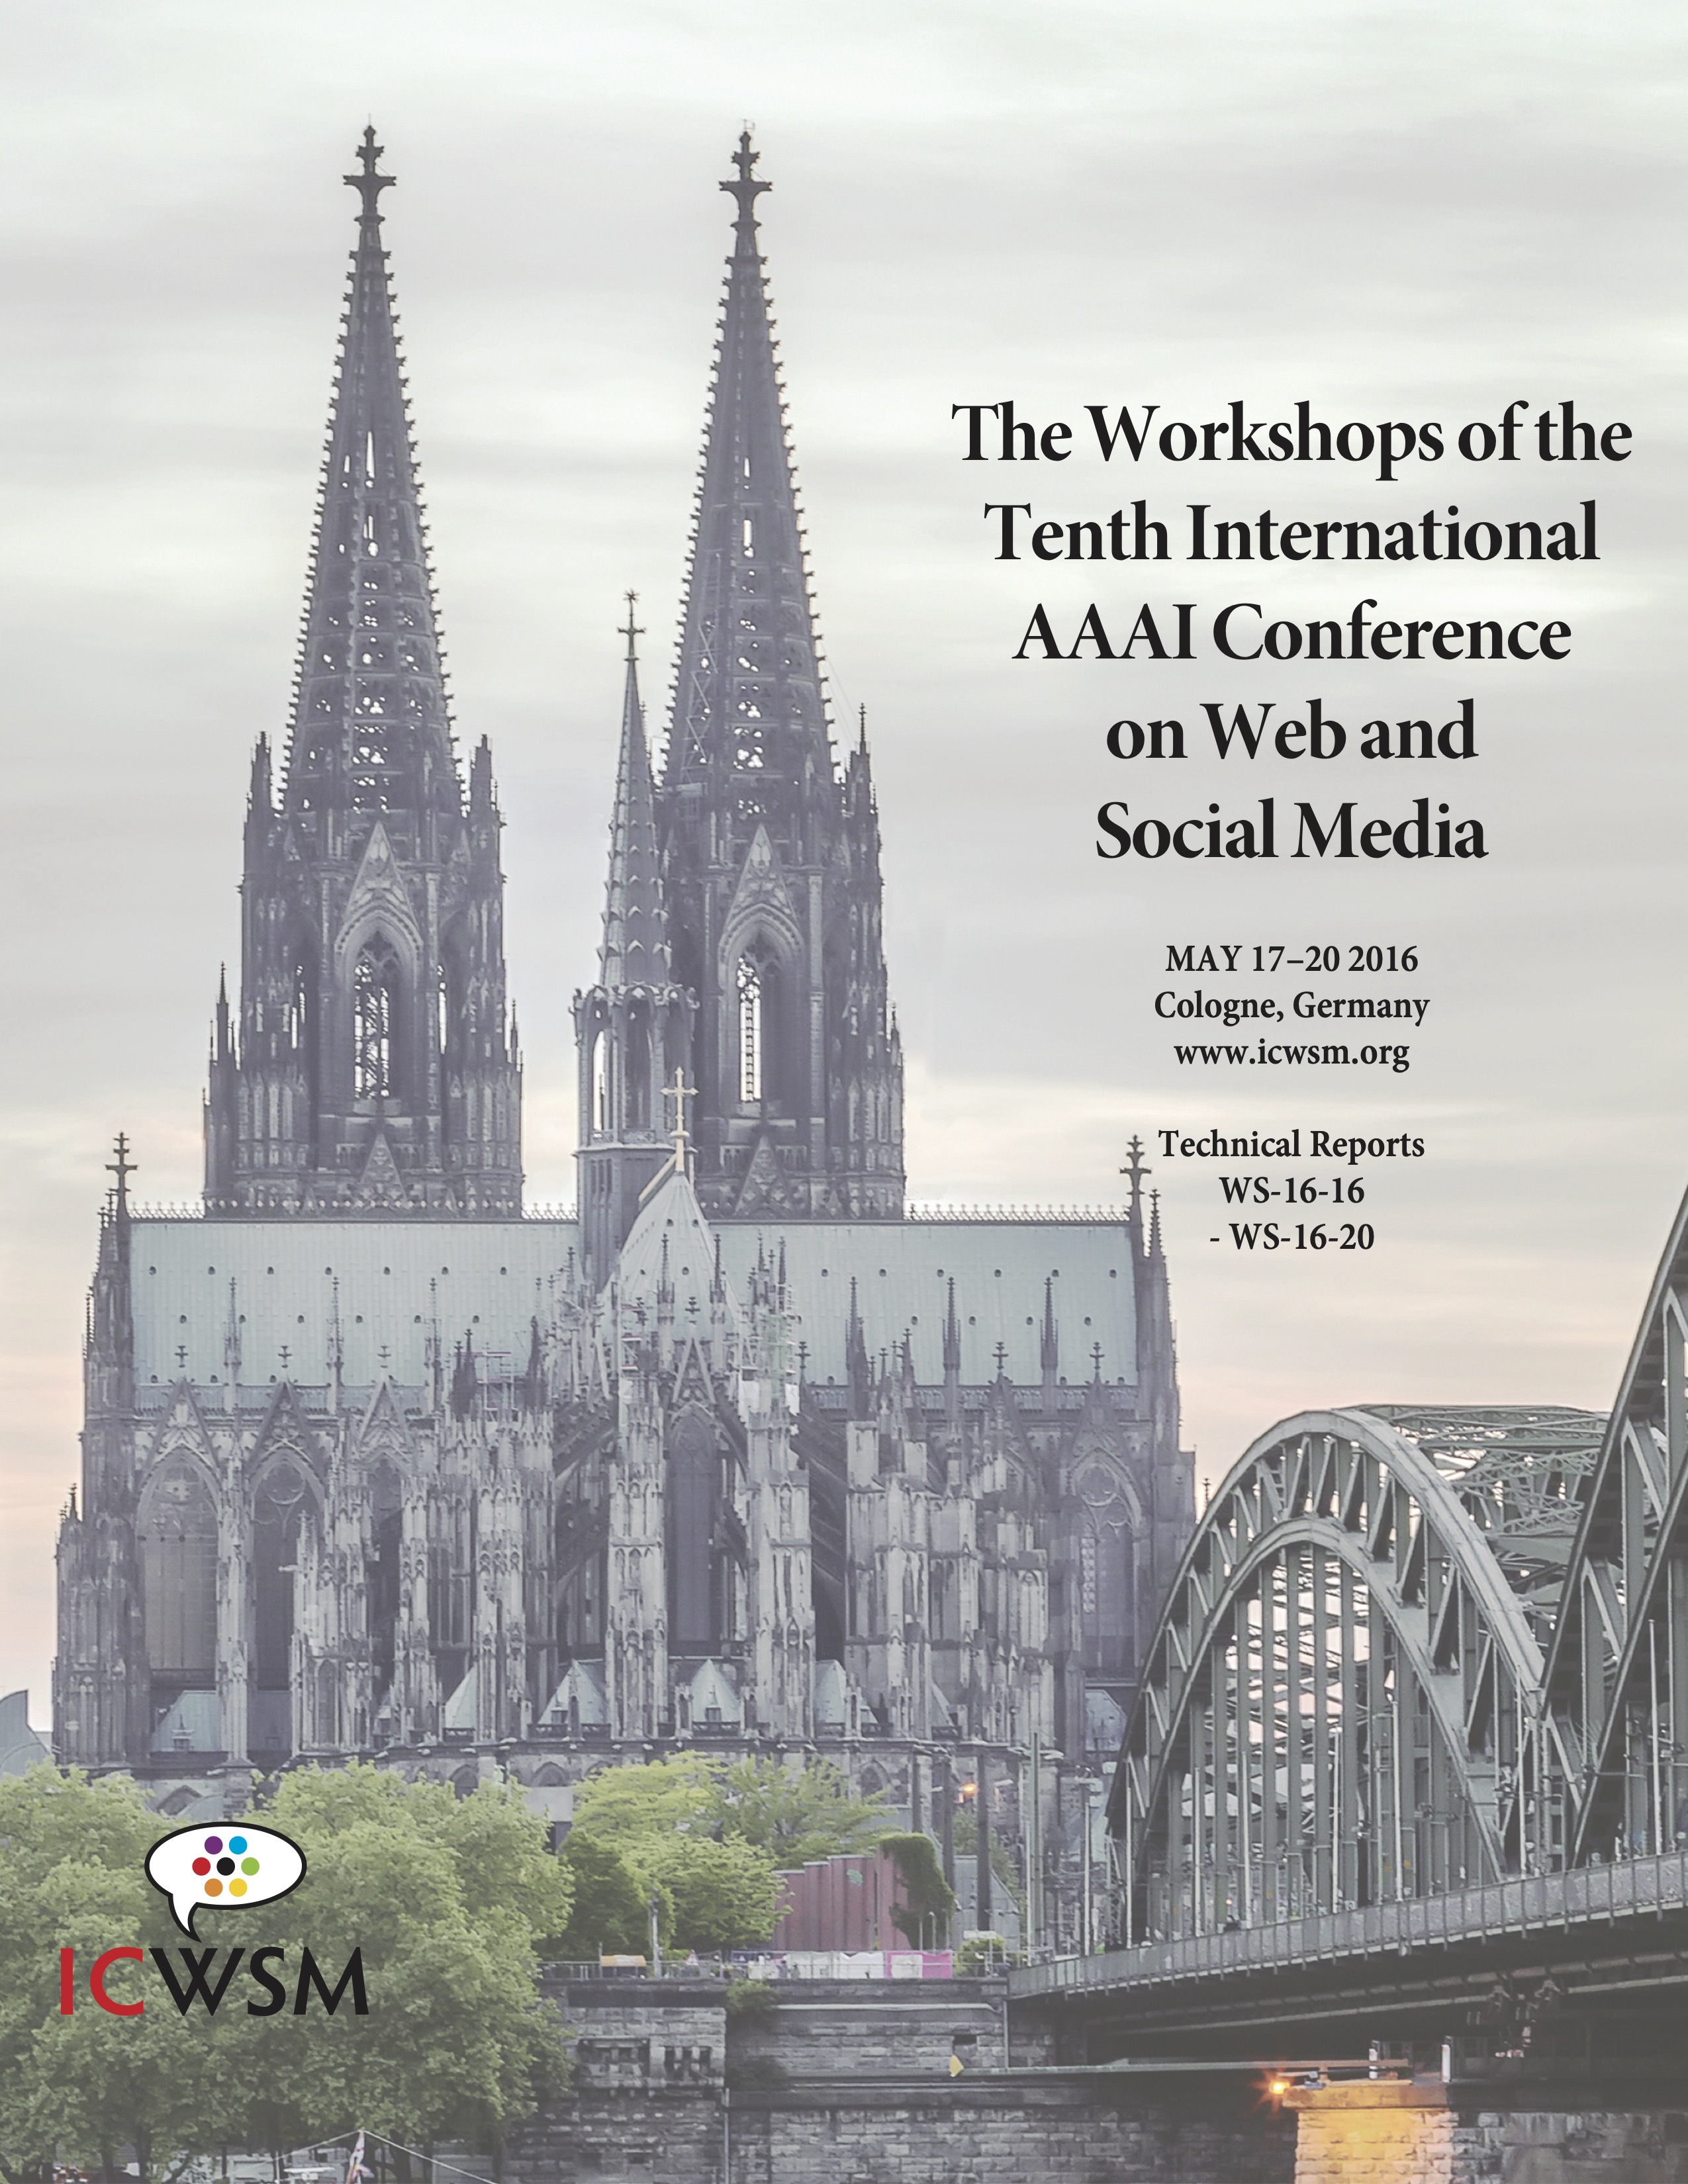 					View Vol. 10 No. 2 (2016):  The Workshops of the Tenth International AAAI Conference on Web and Social Media
				